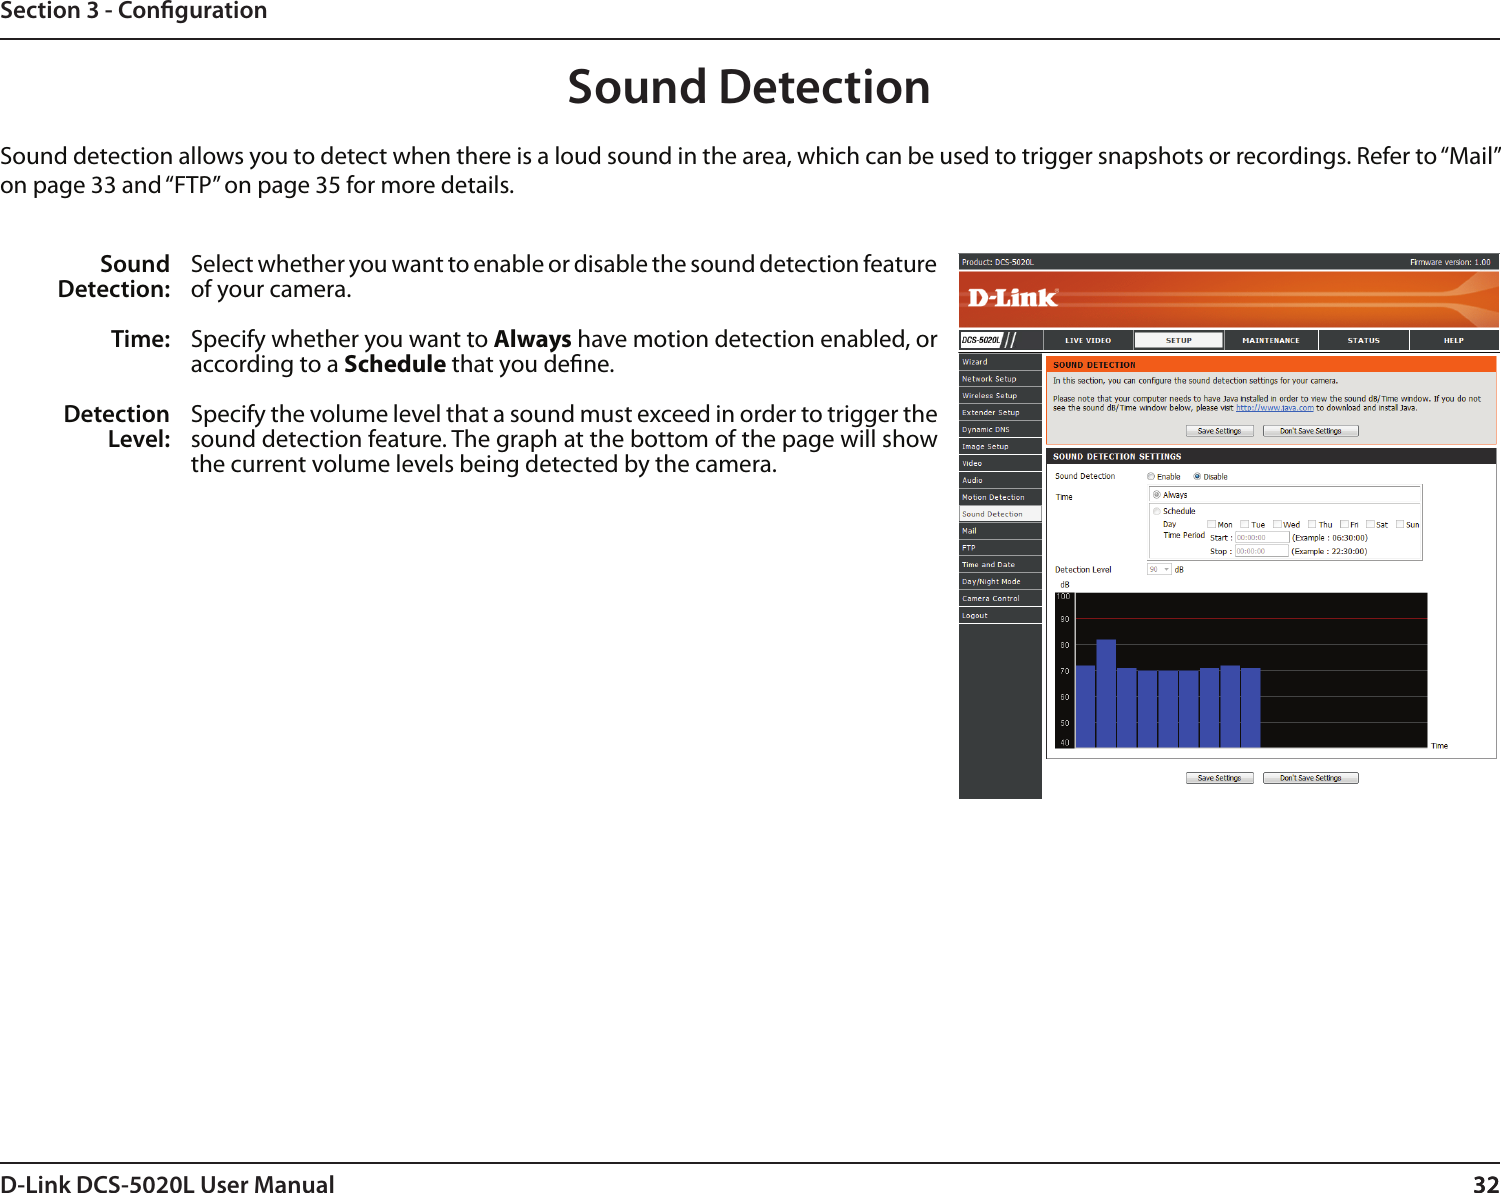 32D-Link DCS-5020L User Manual 32Section 3 - CongurationSound DetectionSound detection allows you to detect when there is a loud sound in the area, which can be used to trigger snapshots or recordings. Refer to “Mail” on page 33 and “FTP” on page 35 for more details.Sound Detection:Time:Detection Level:Select whether you want to enable or disable the sound detection feature of your camera.Specify whether you want to Always have motion detection enabled, or according to a Schedule that you dene.Specify the volume level that a sound must exceed in order to trigger the sound detection feature. The graph at the bottom of the page will show the current volume levels being detected by the camera. 